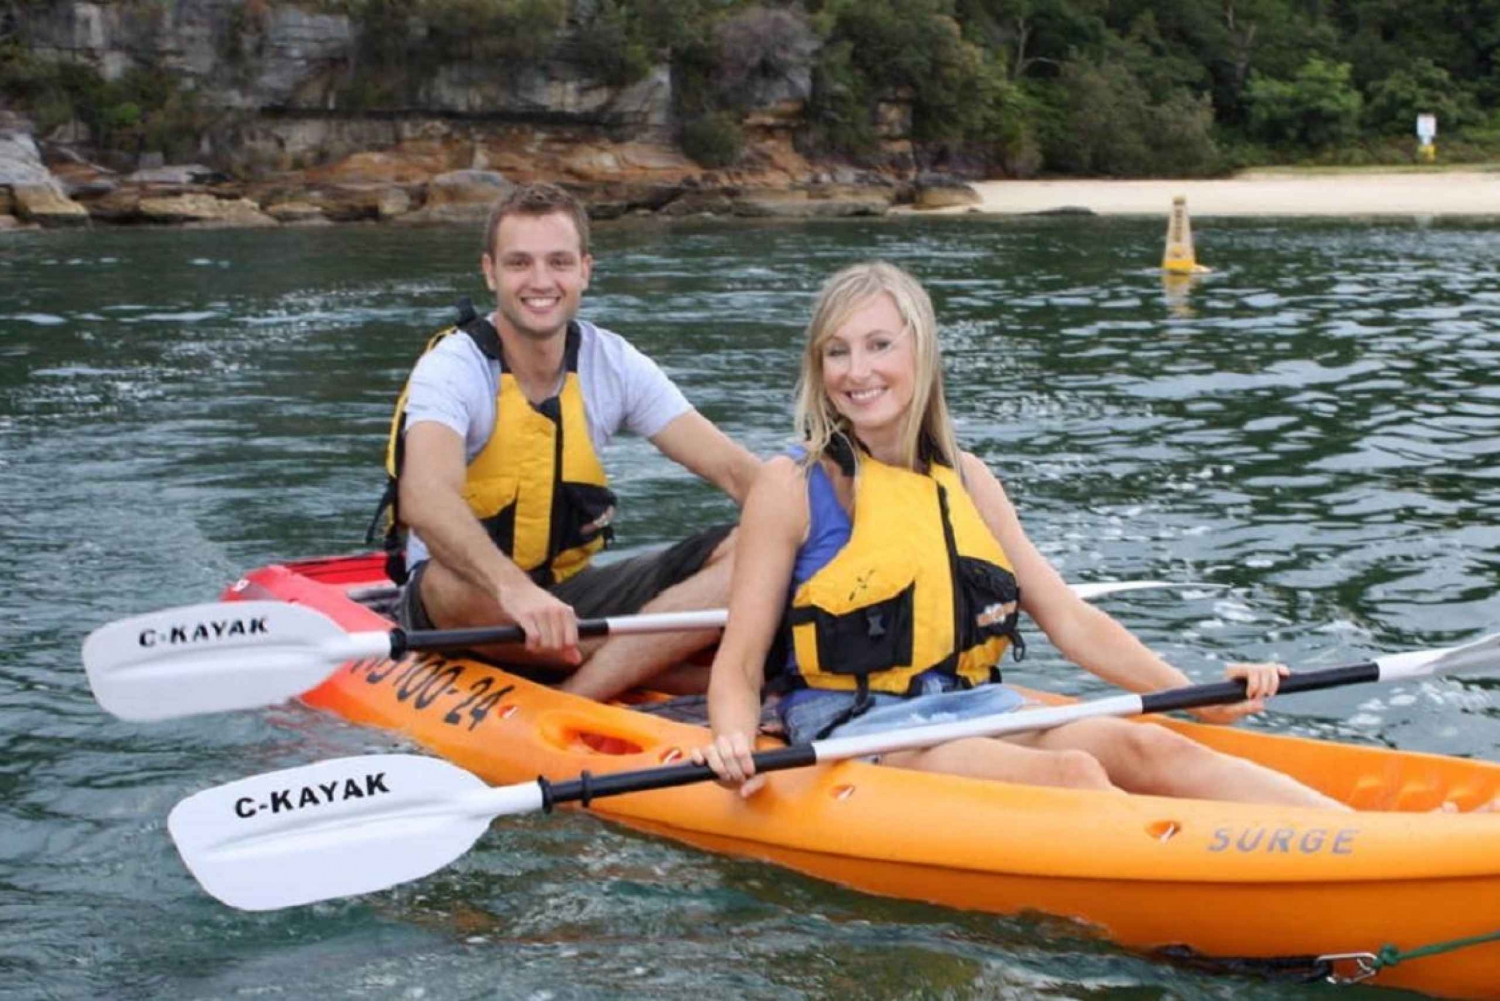 Manly: 4-Hour Double Kayak Hire for 2 People